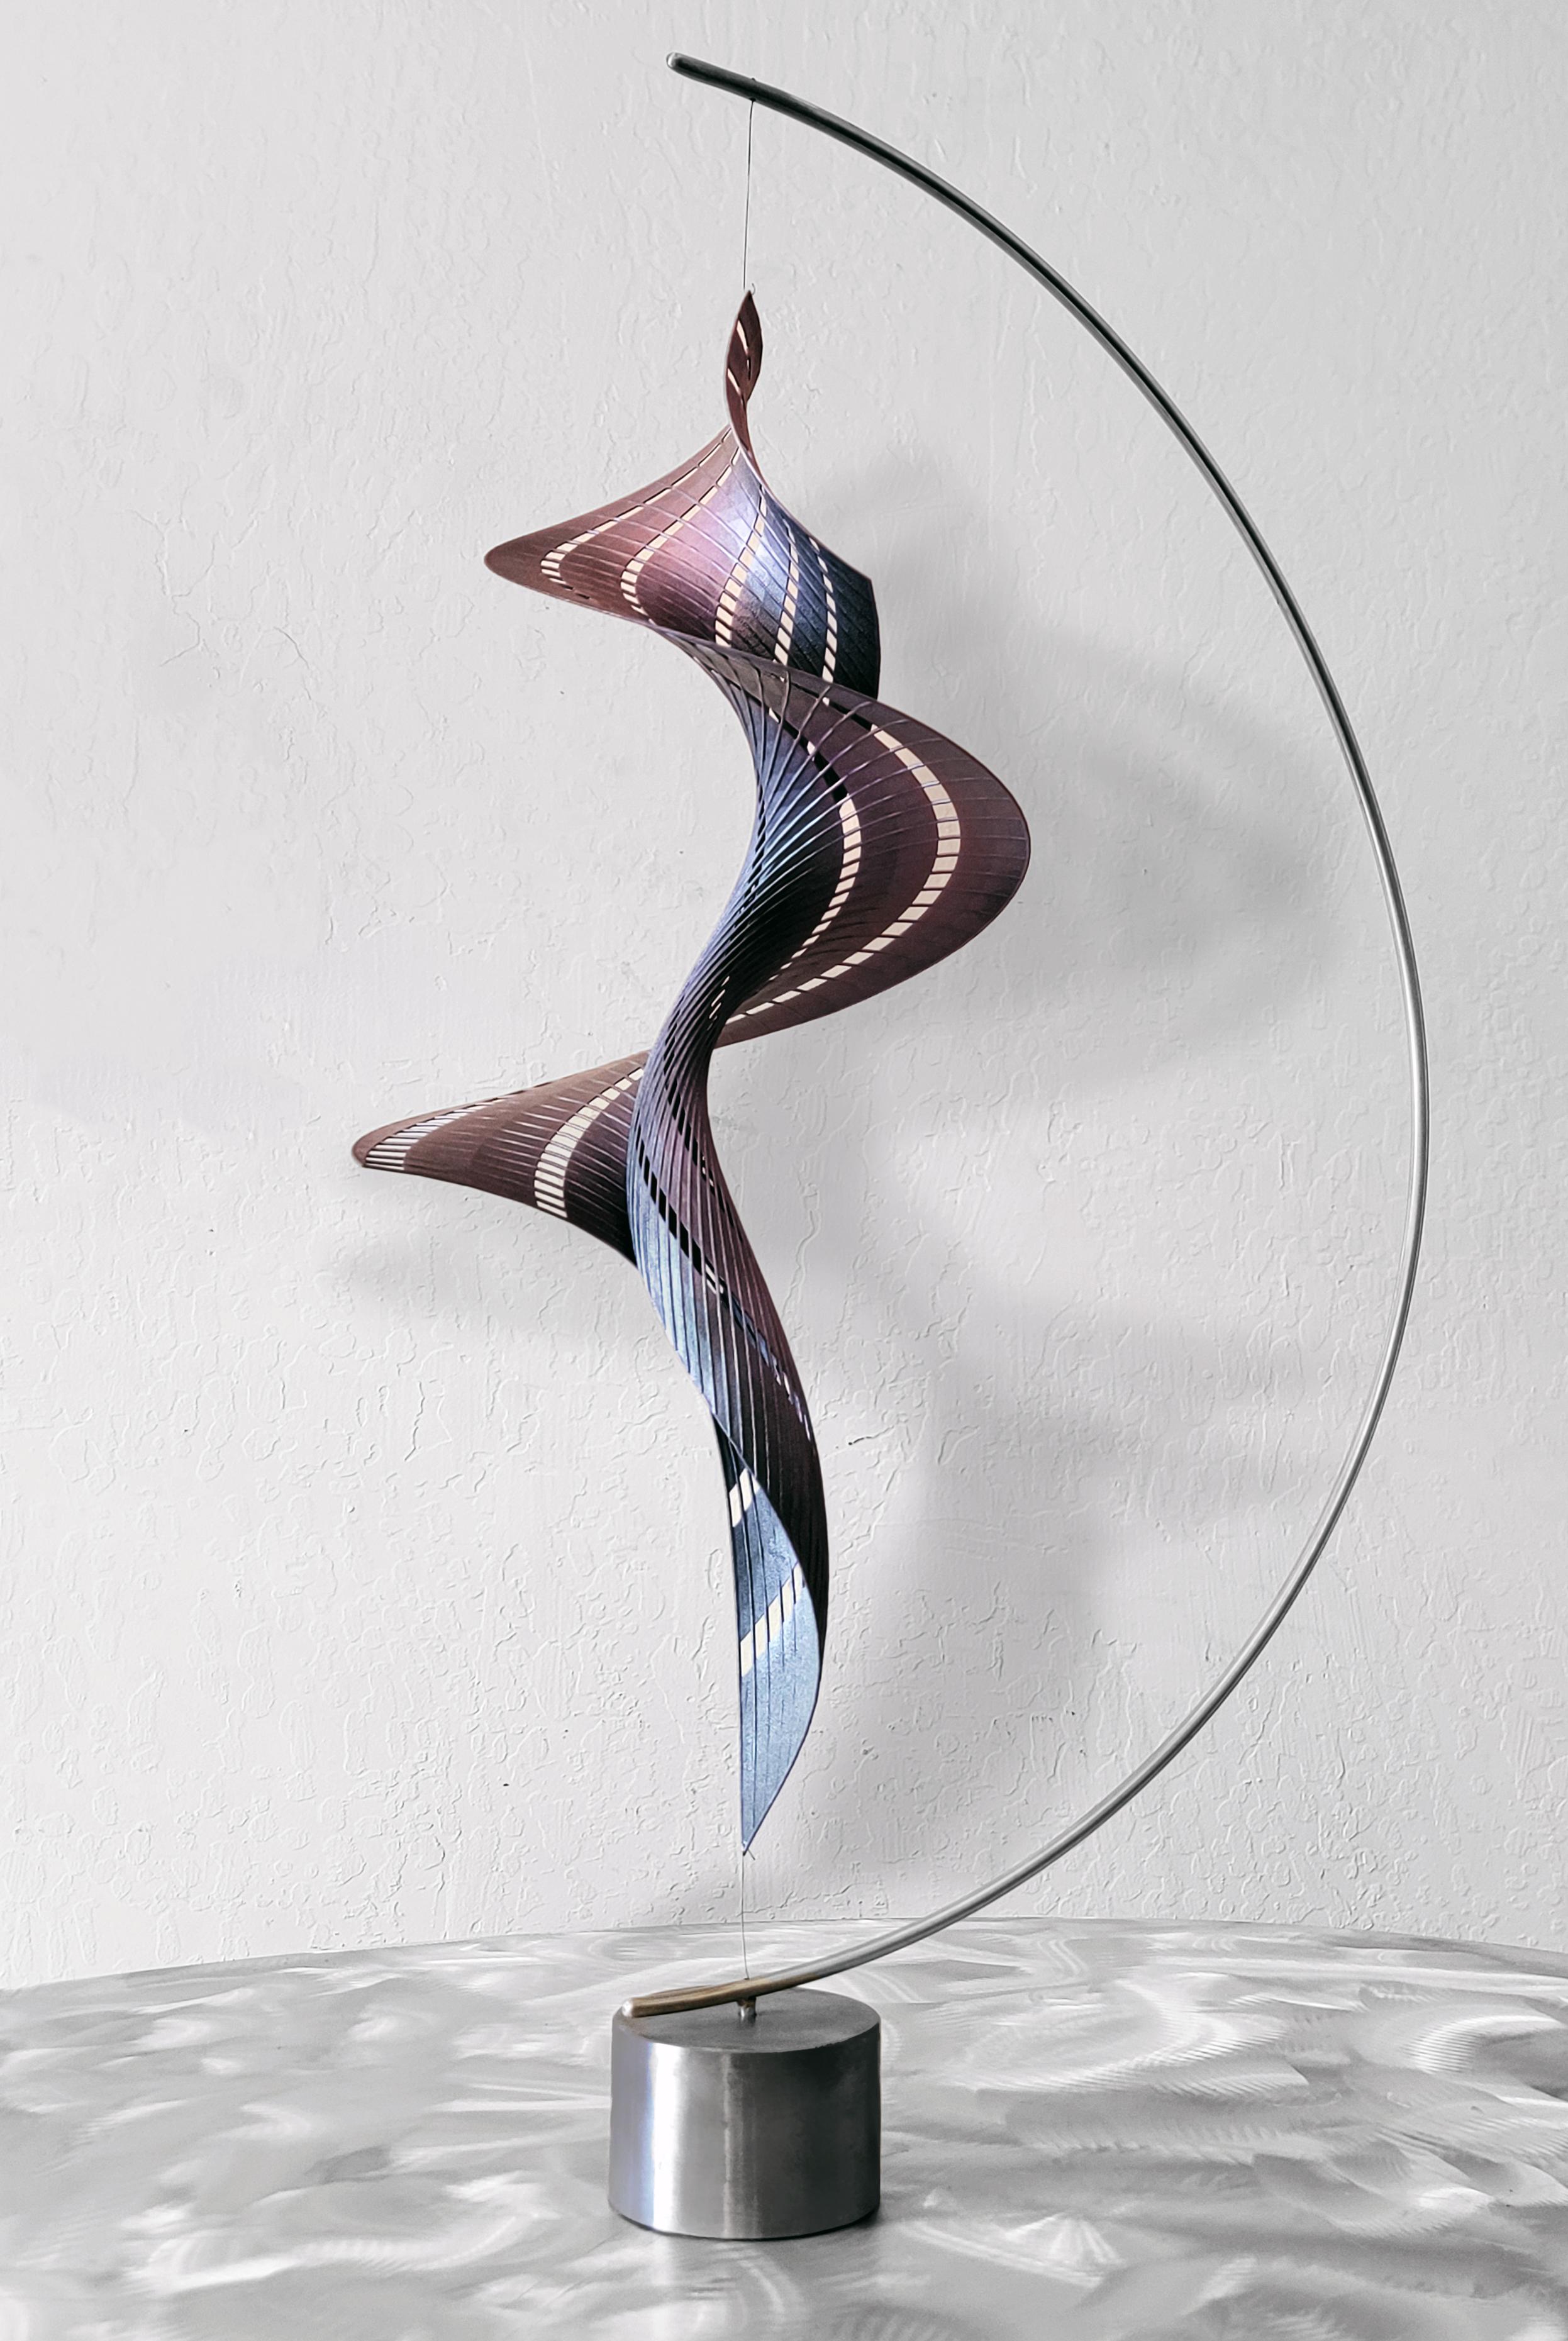 DERVISH - Abstract Sculpture by Lyle London